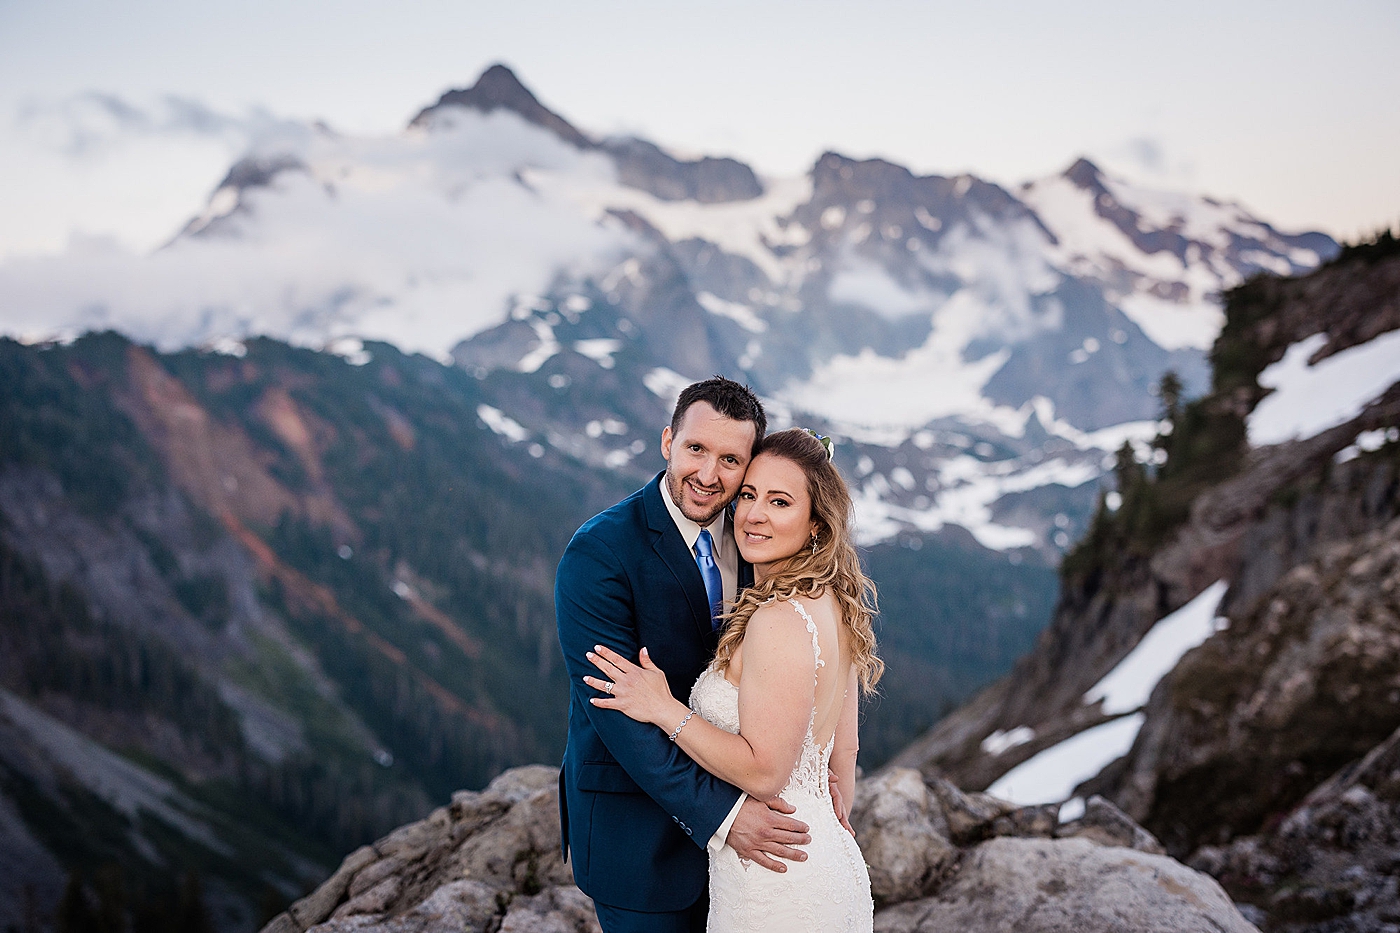 Couples portraits with stunning mountain views behind them. Photo by Megan Montalvo Photography.